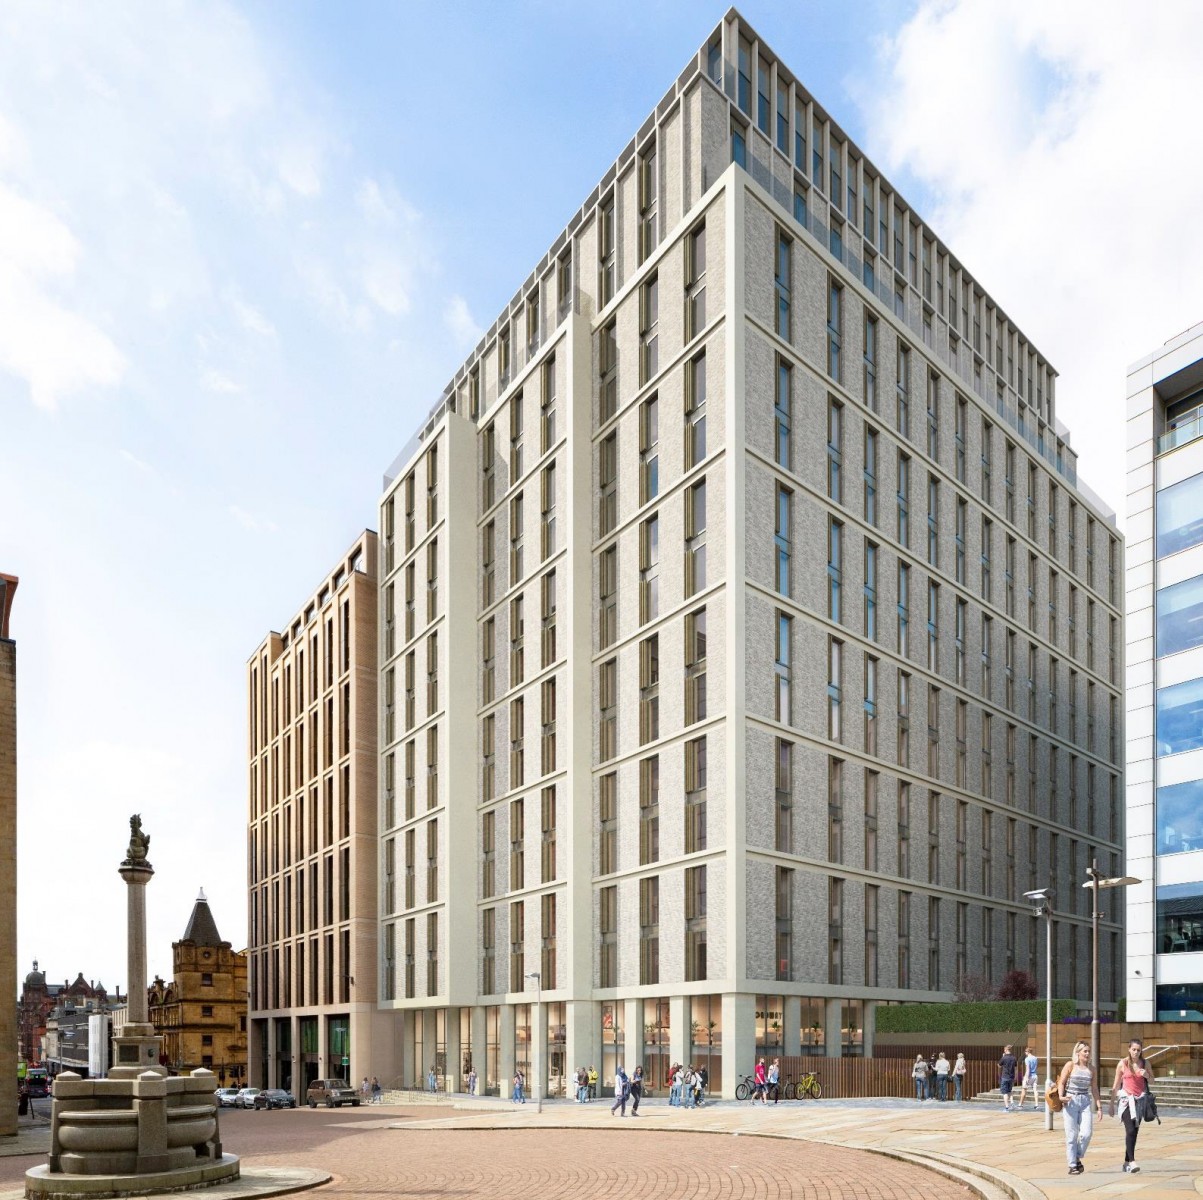 Revised plans lodged for student accommodation at former STV Glasgow site